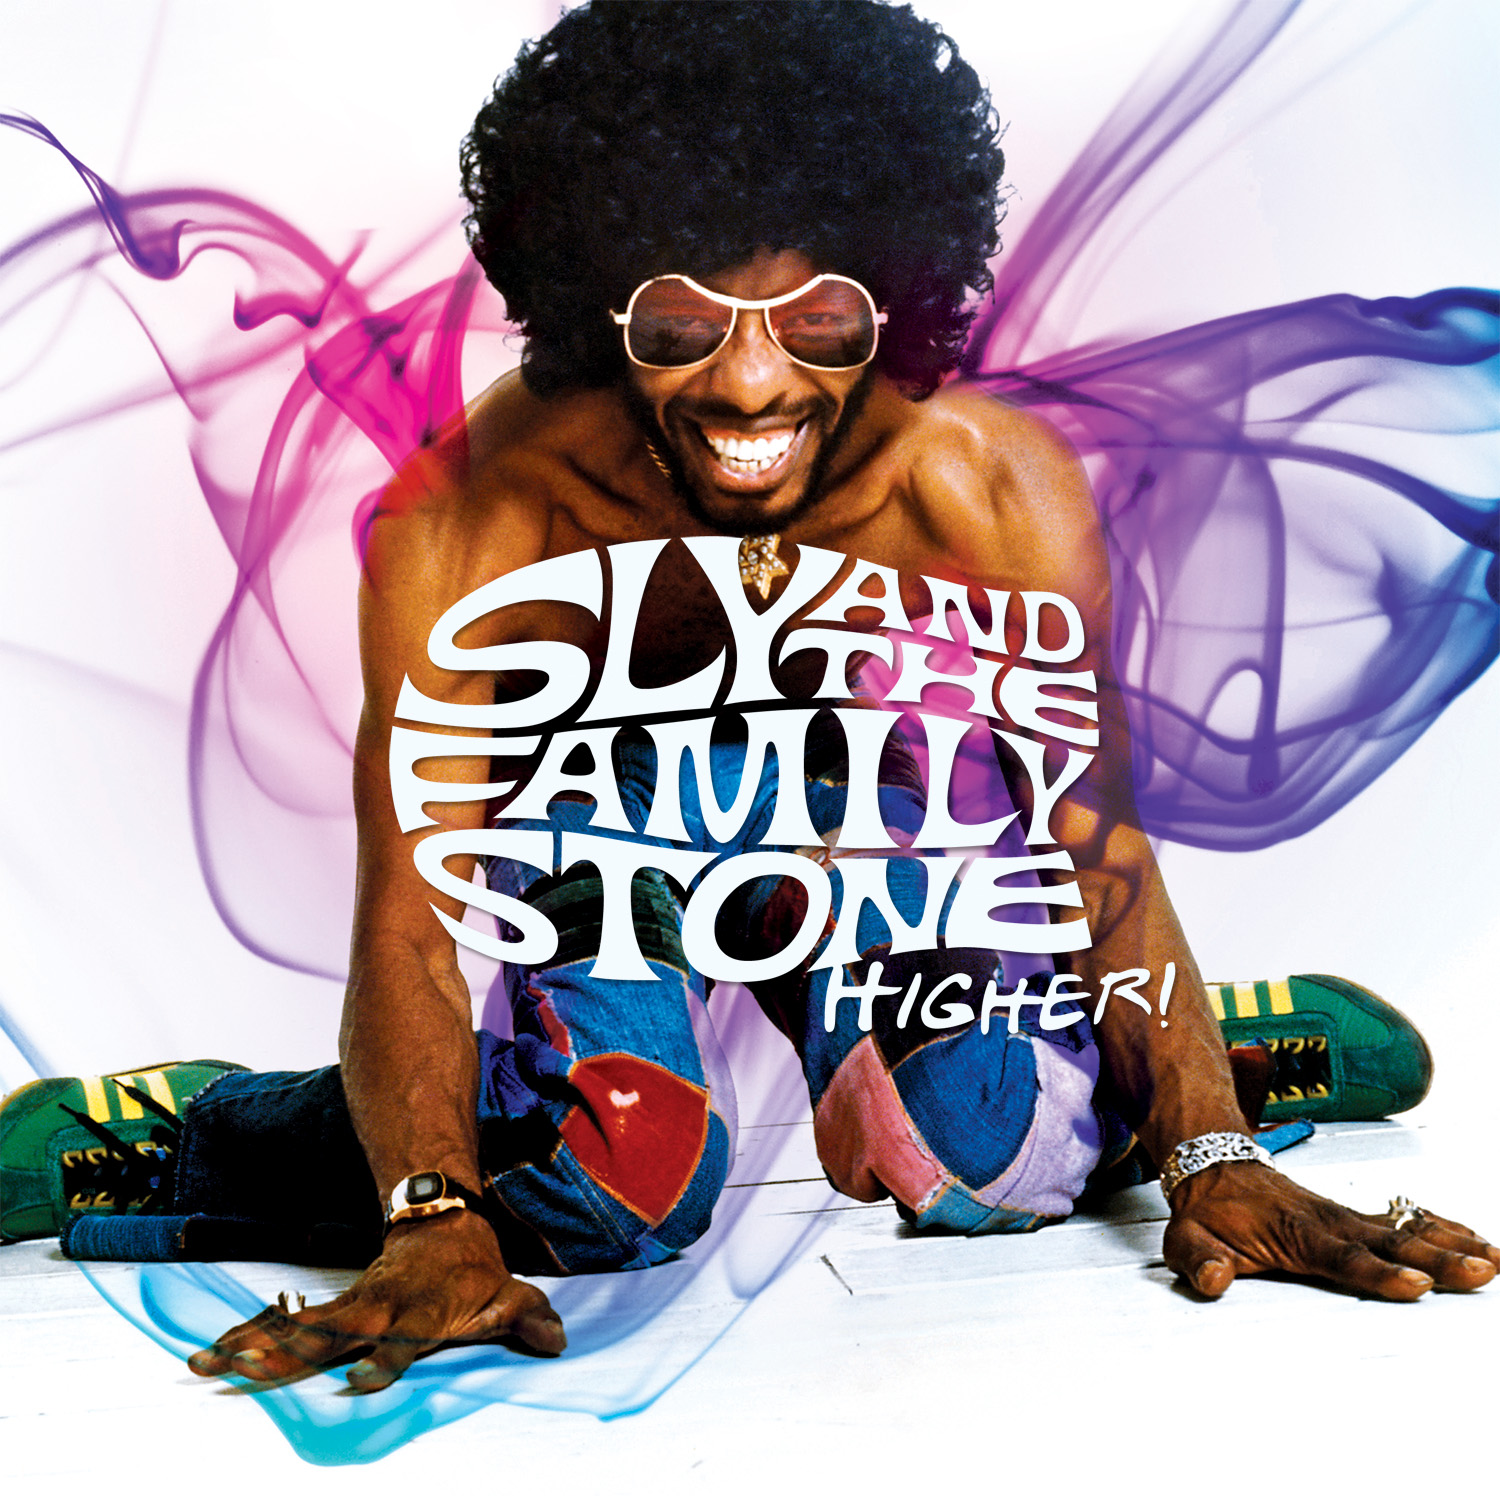 Sly & The Family Stone – “Higher“